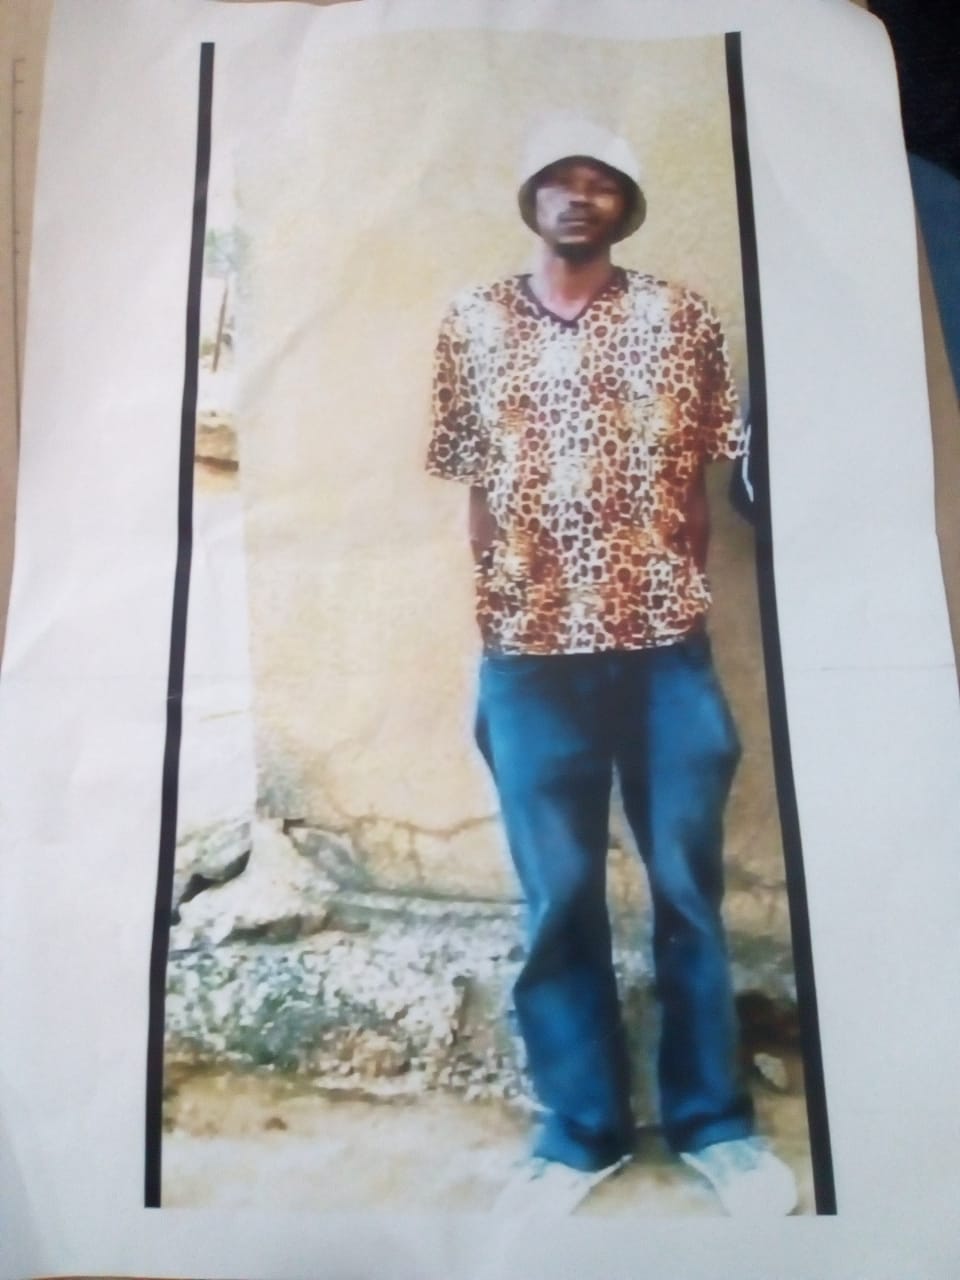 The Makwane police need community assistance in locating missing Ximba Bongani Victor